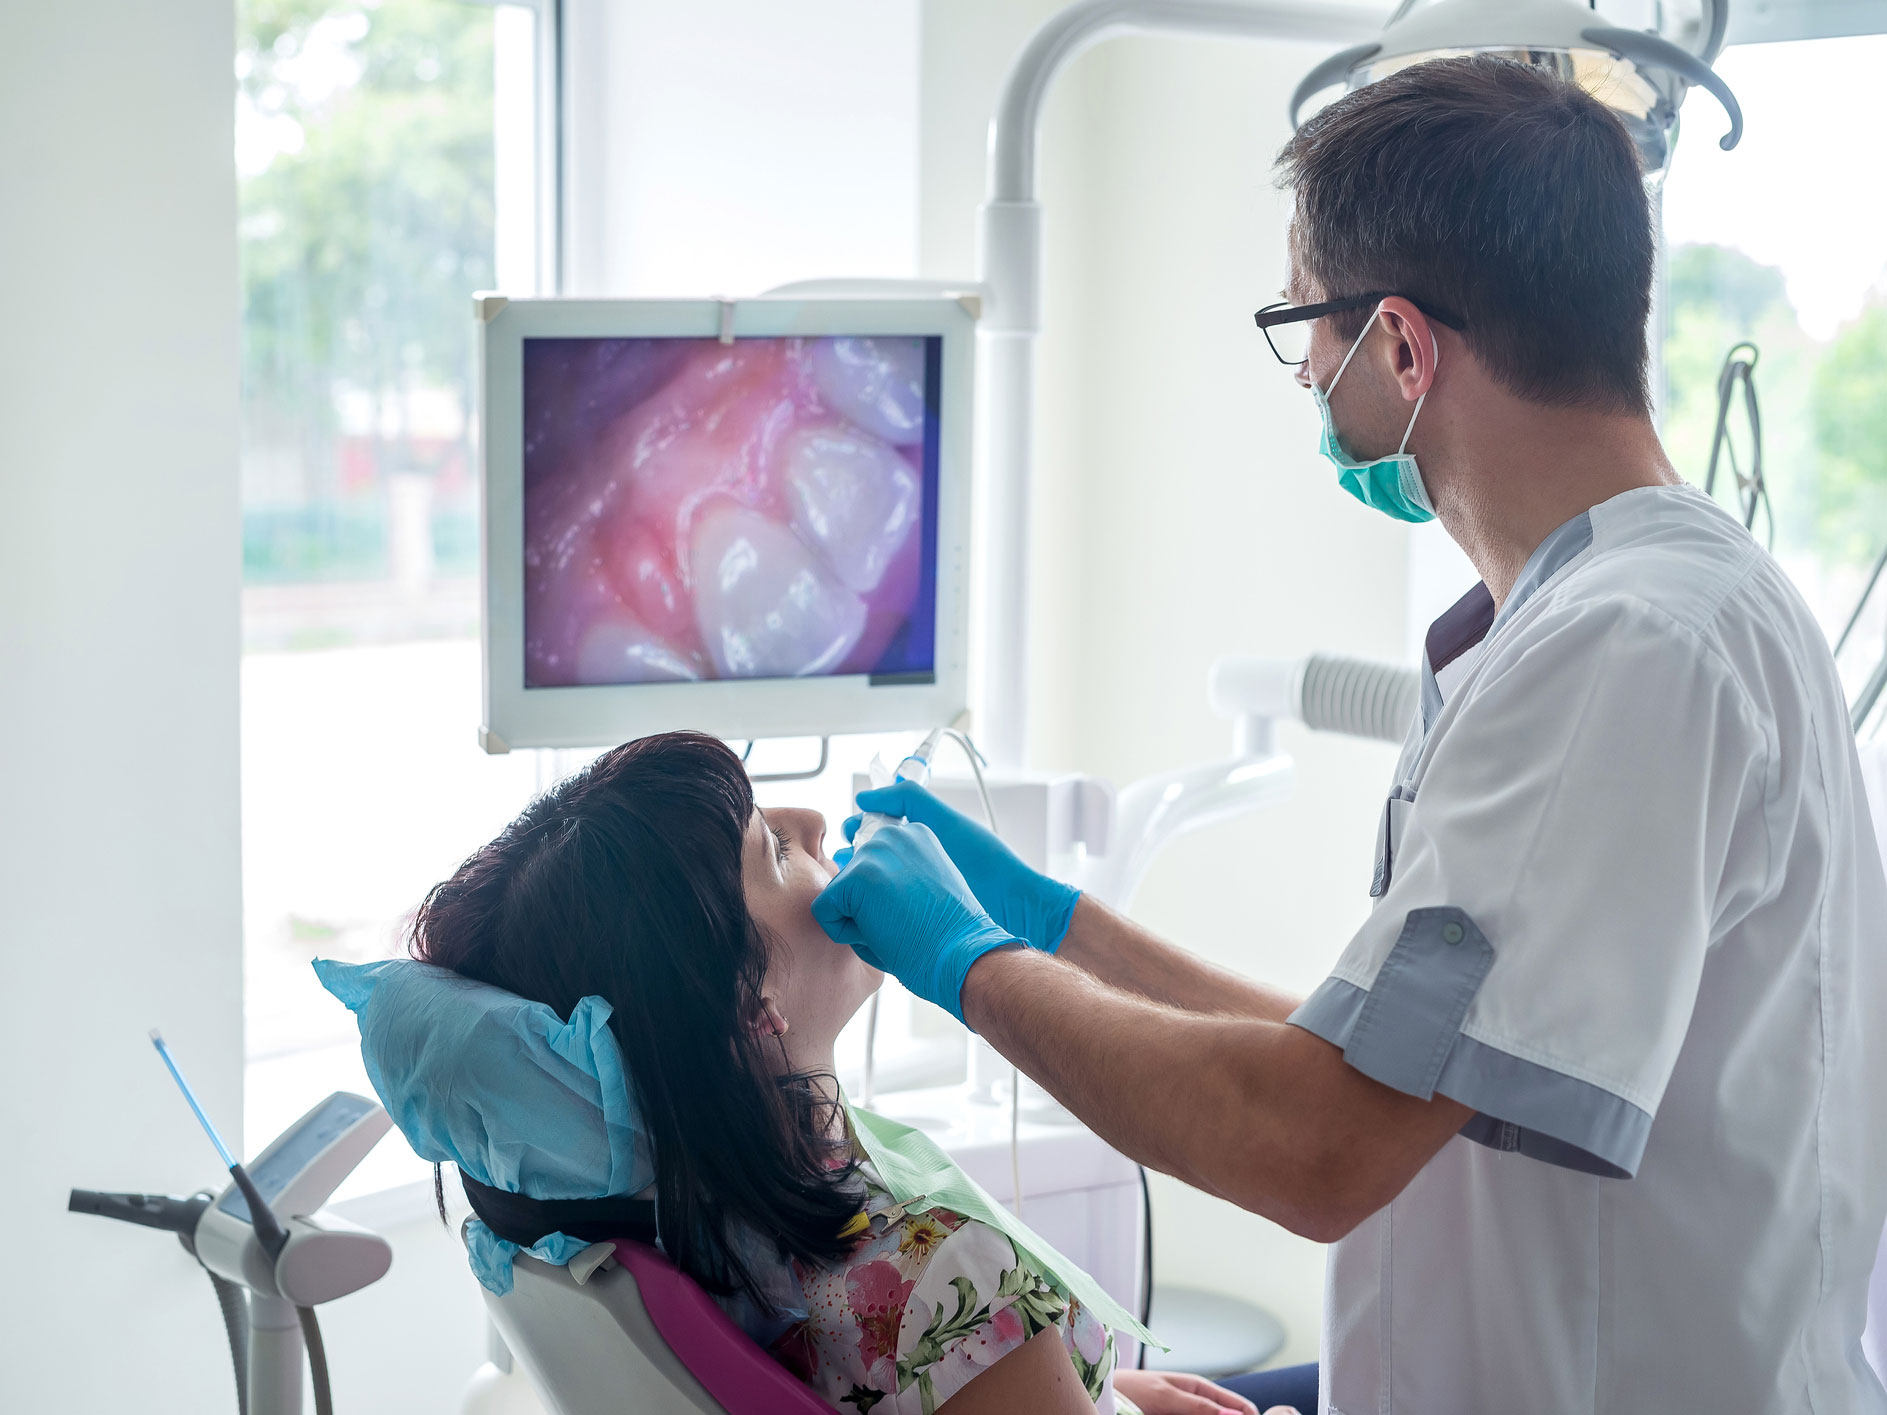 How skipping out on regular dental visits leads to cancer